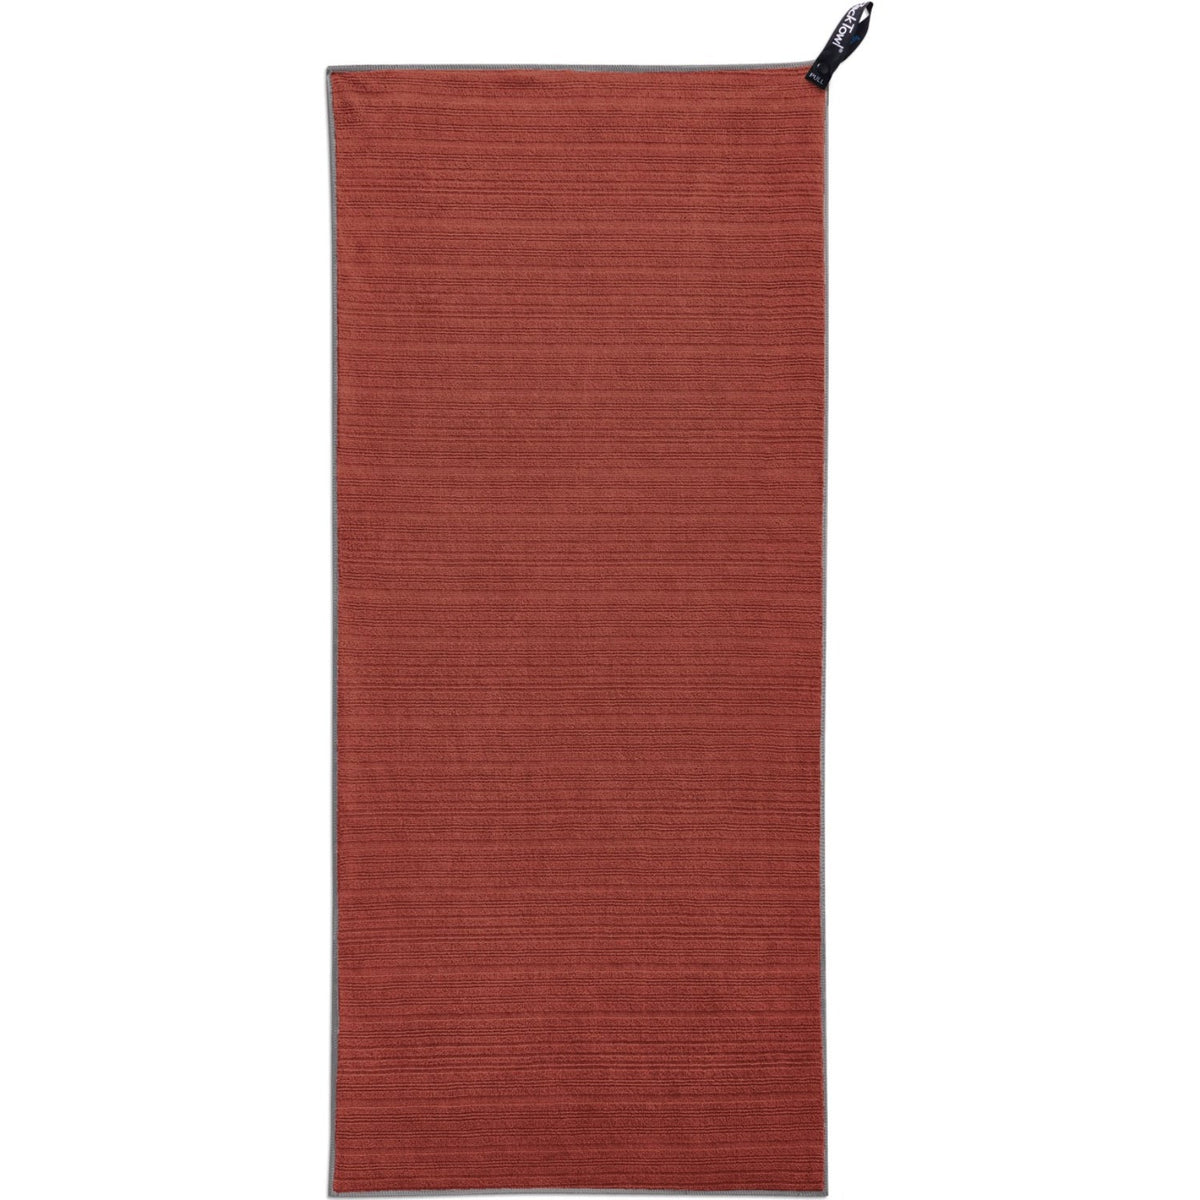 PackTowl Luxe Towel - Hand in terracotta